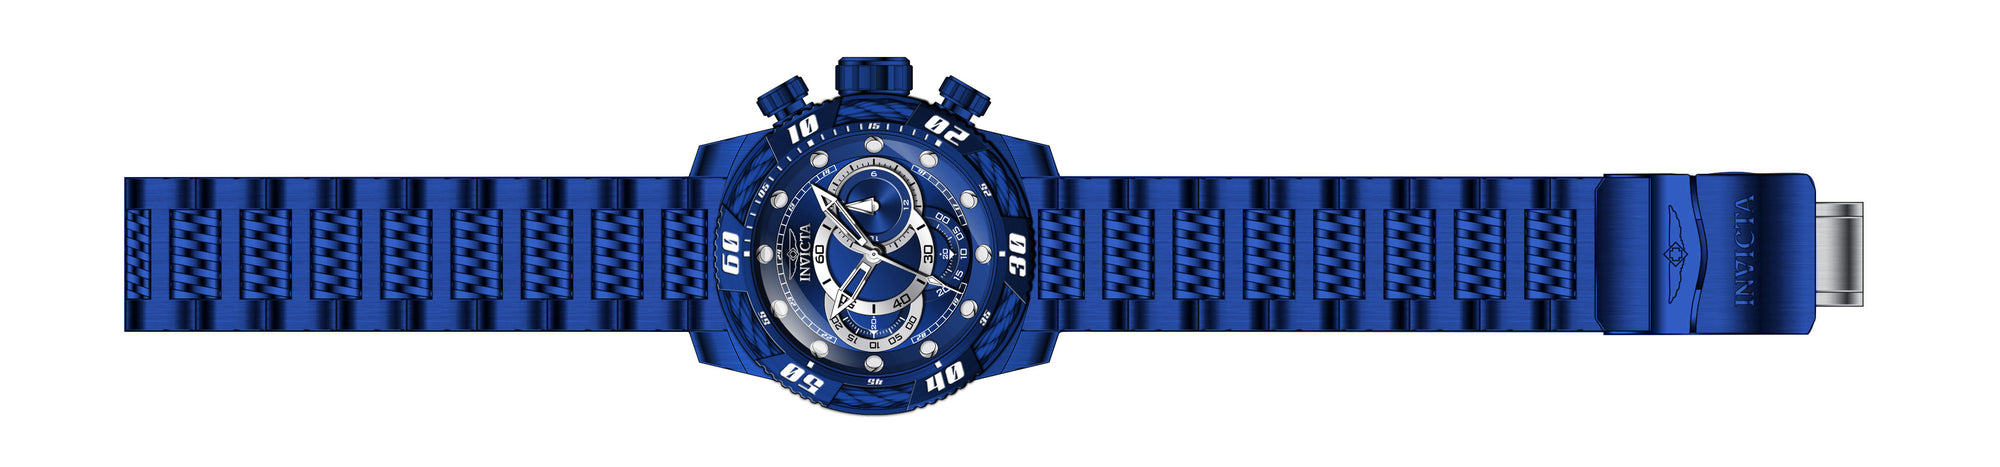 Band for Invicta Speedway Men 40775